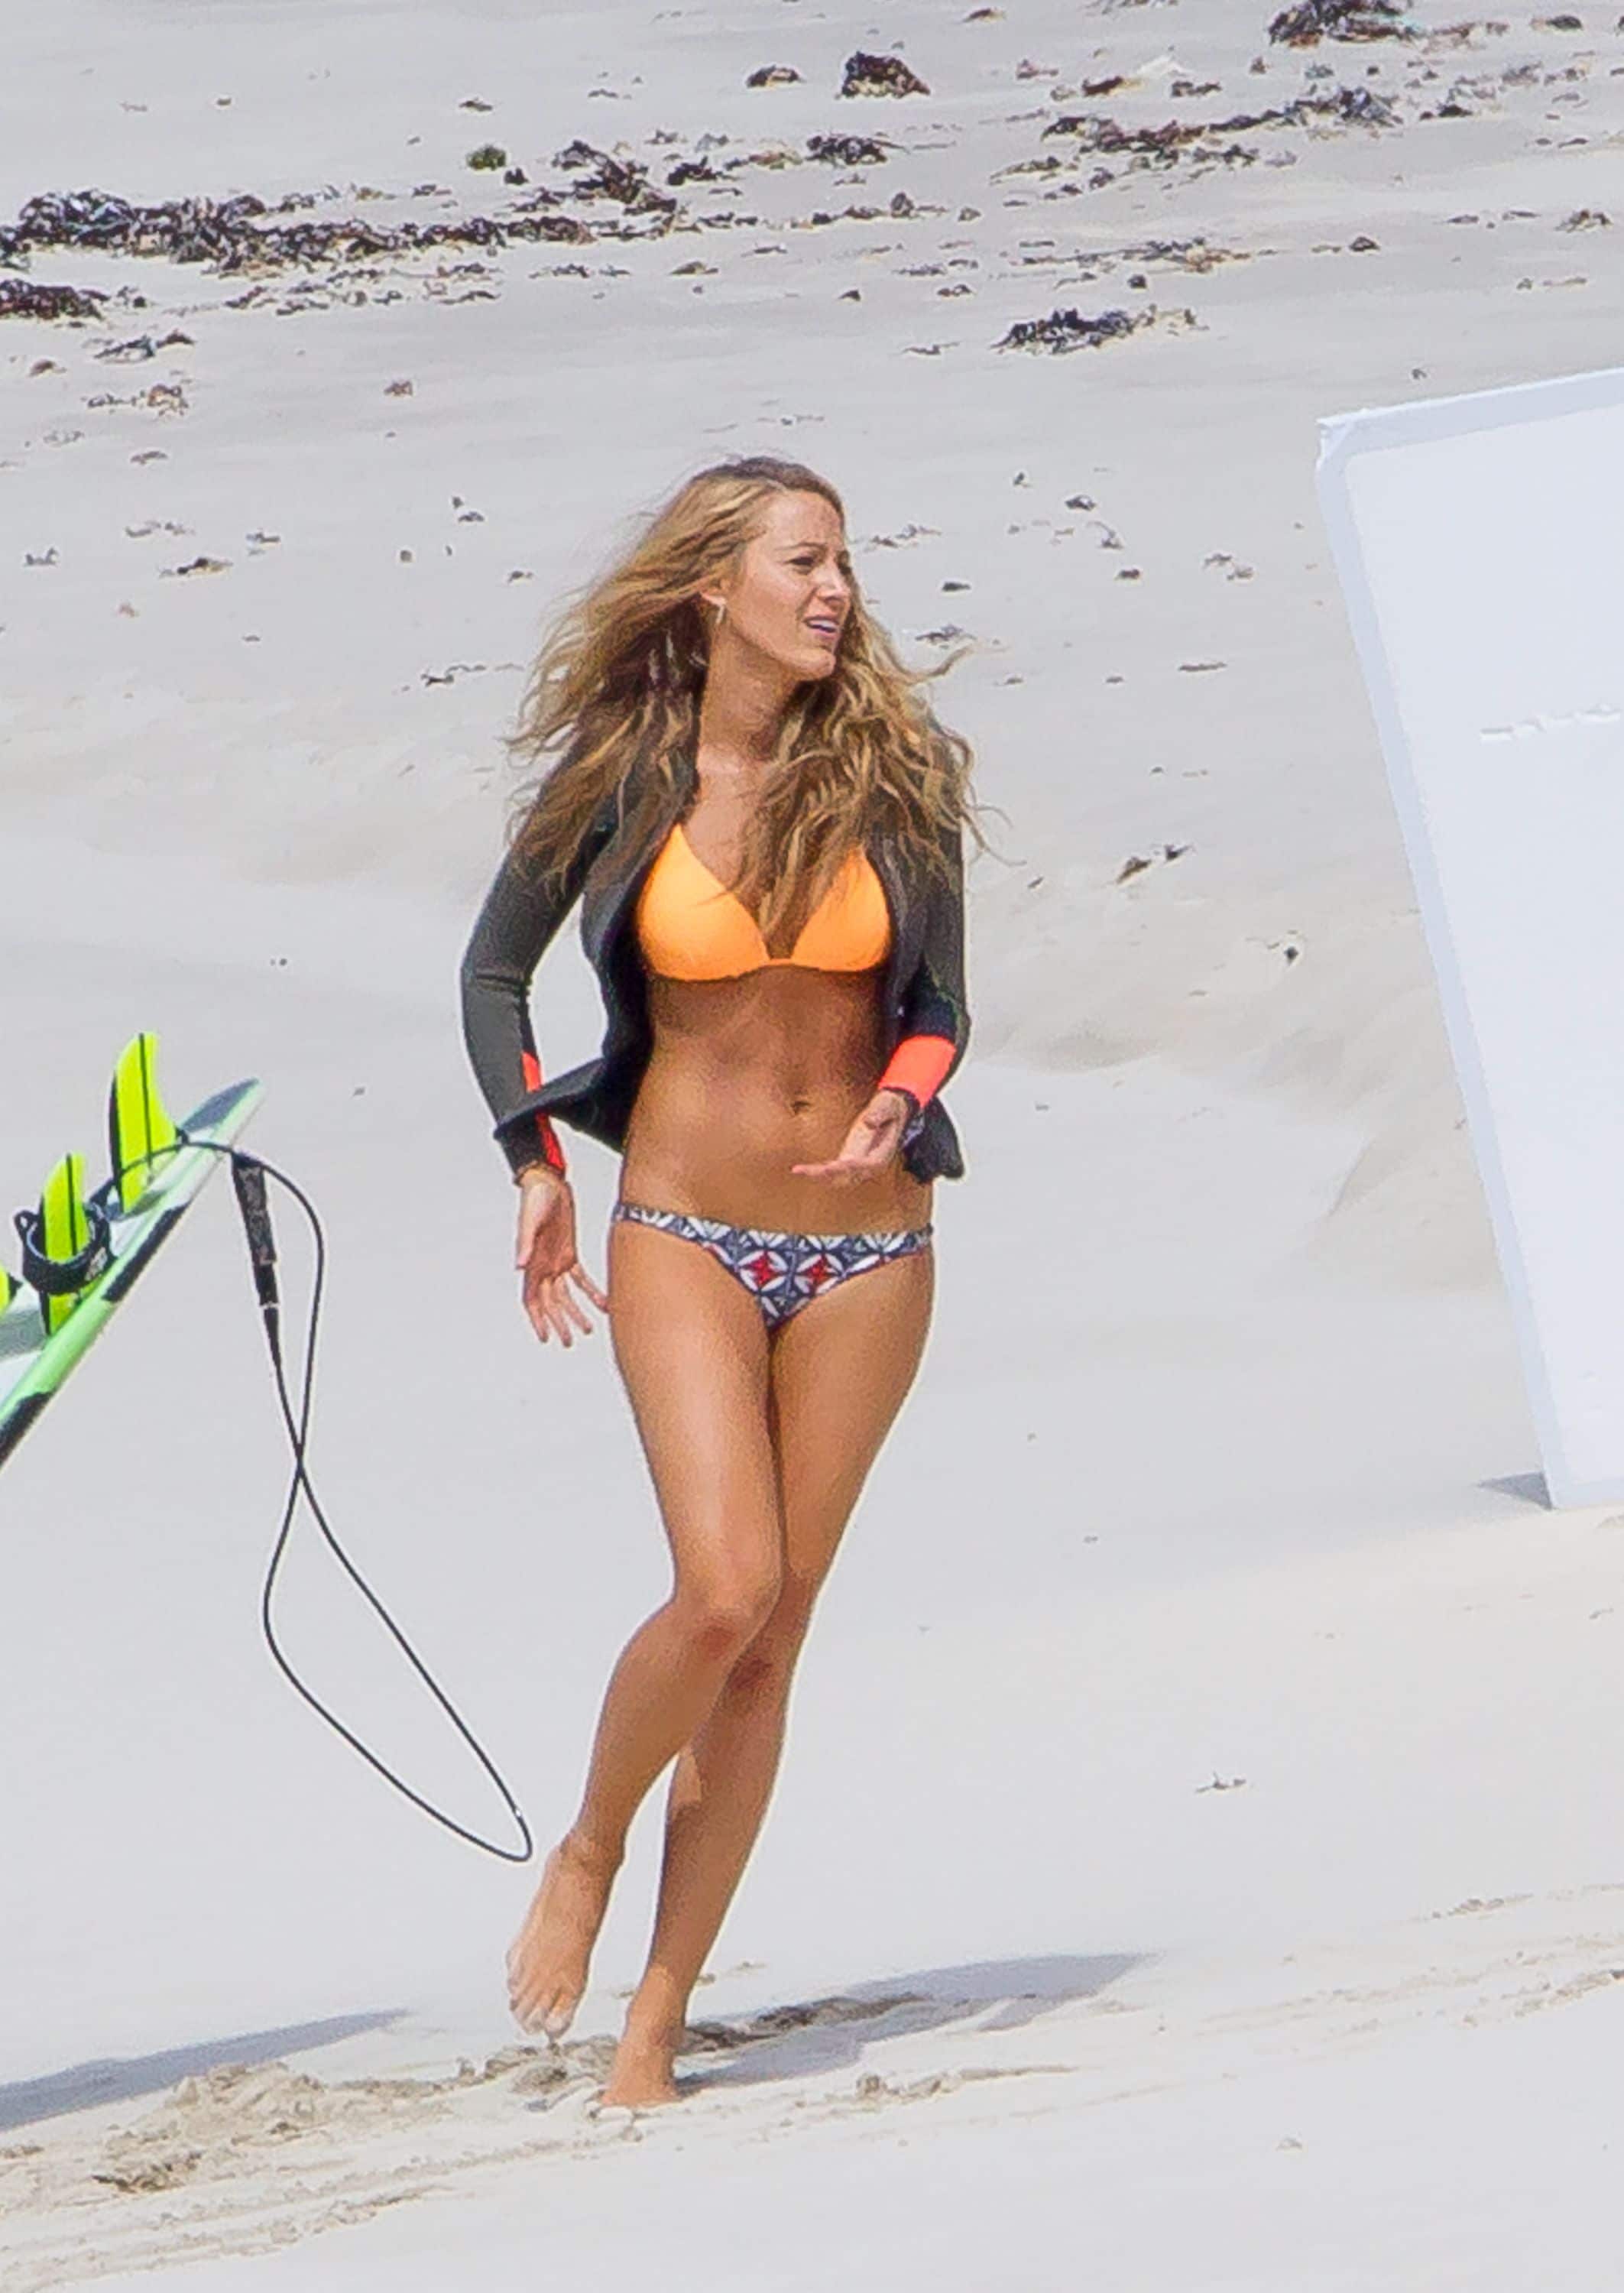 61 Hottest Blake Lively’s Ass Pictures Are A Definition Of A Perfect Booty | Best Of Comic Books